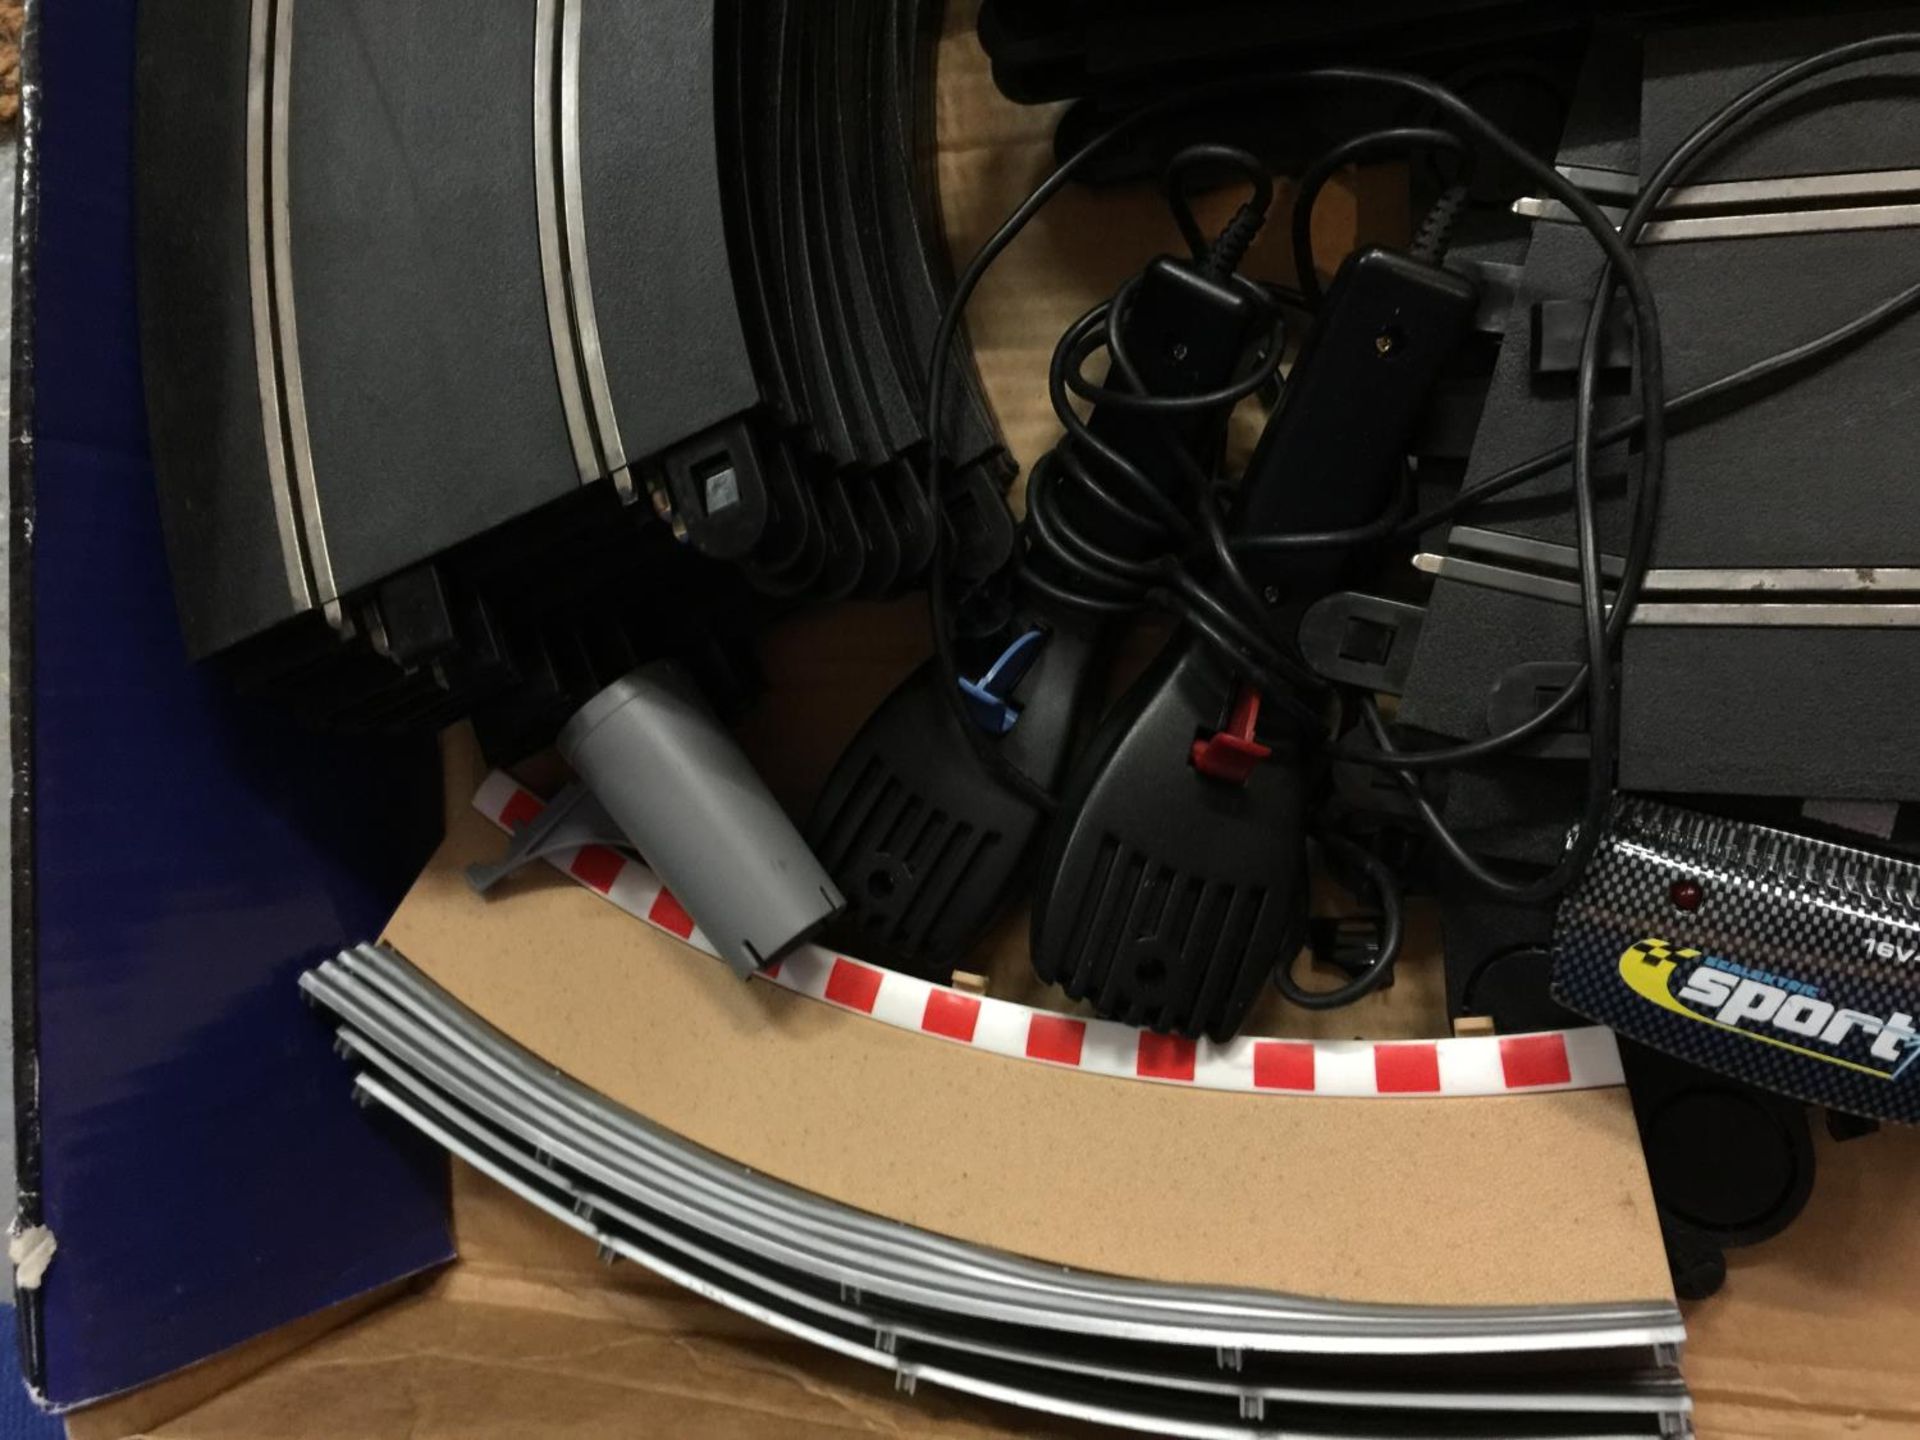 A F1 SCALEXTRIC SET INCLUDING TRACK, KERBING BARRIERS, CONTROLLERS ETC. BOTH CARS ARE A/F FOR SPARES - Image 5 of 5